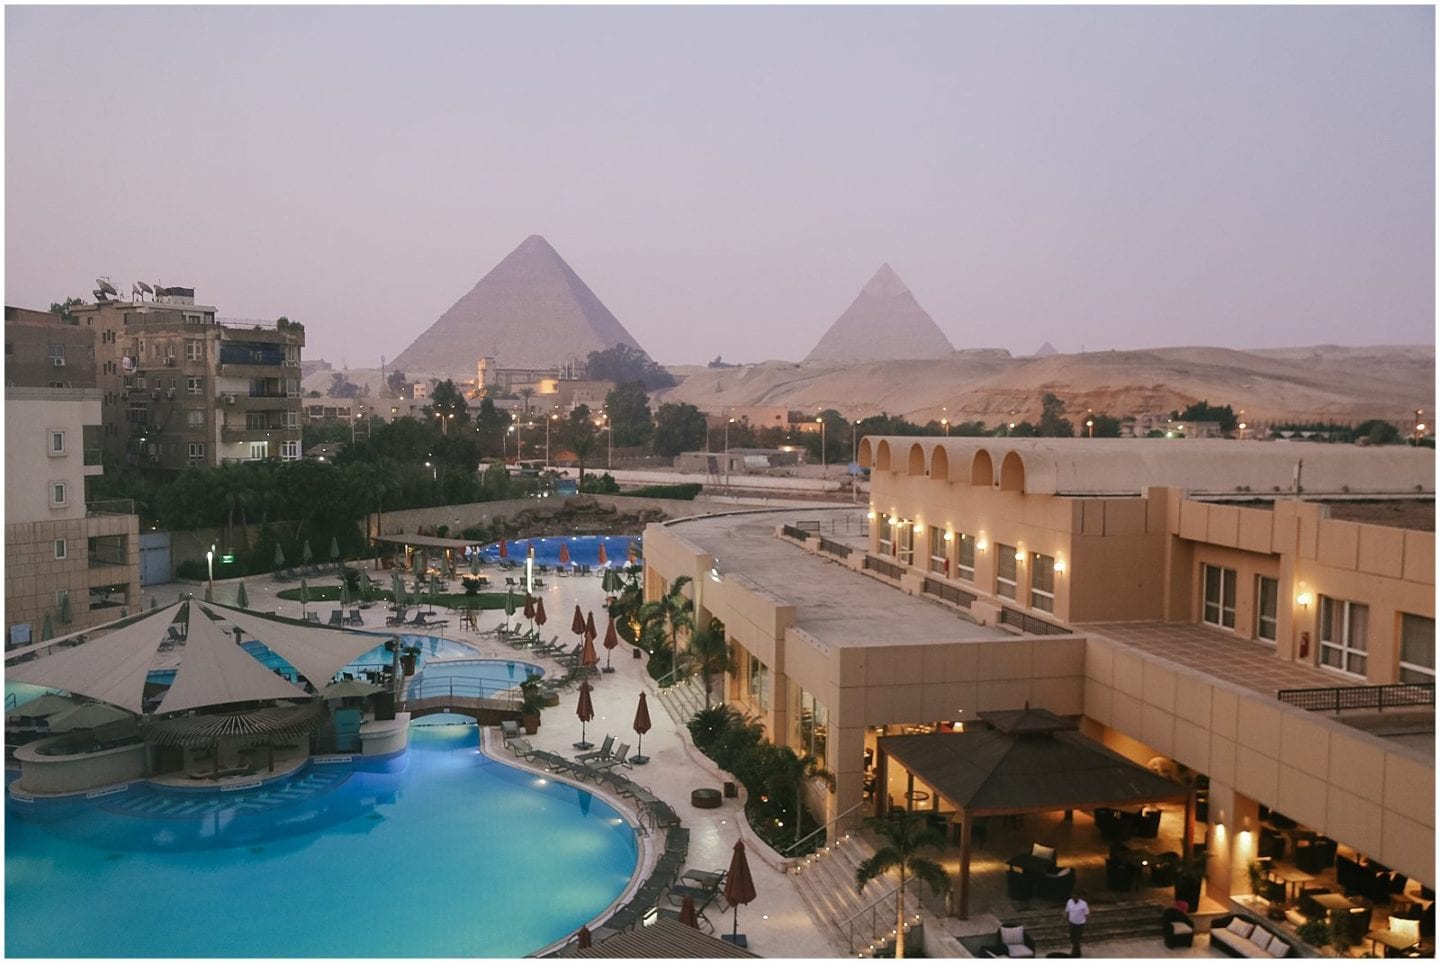 sunrise at Marriott Le Meridien Pyramids hotel pool view of Pyramids of Giza in Egypt 